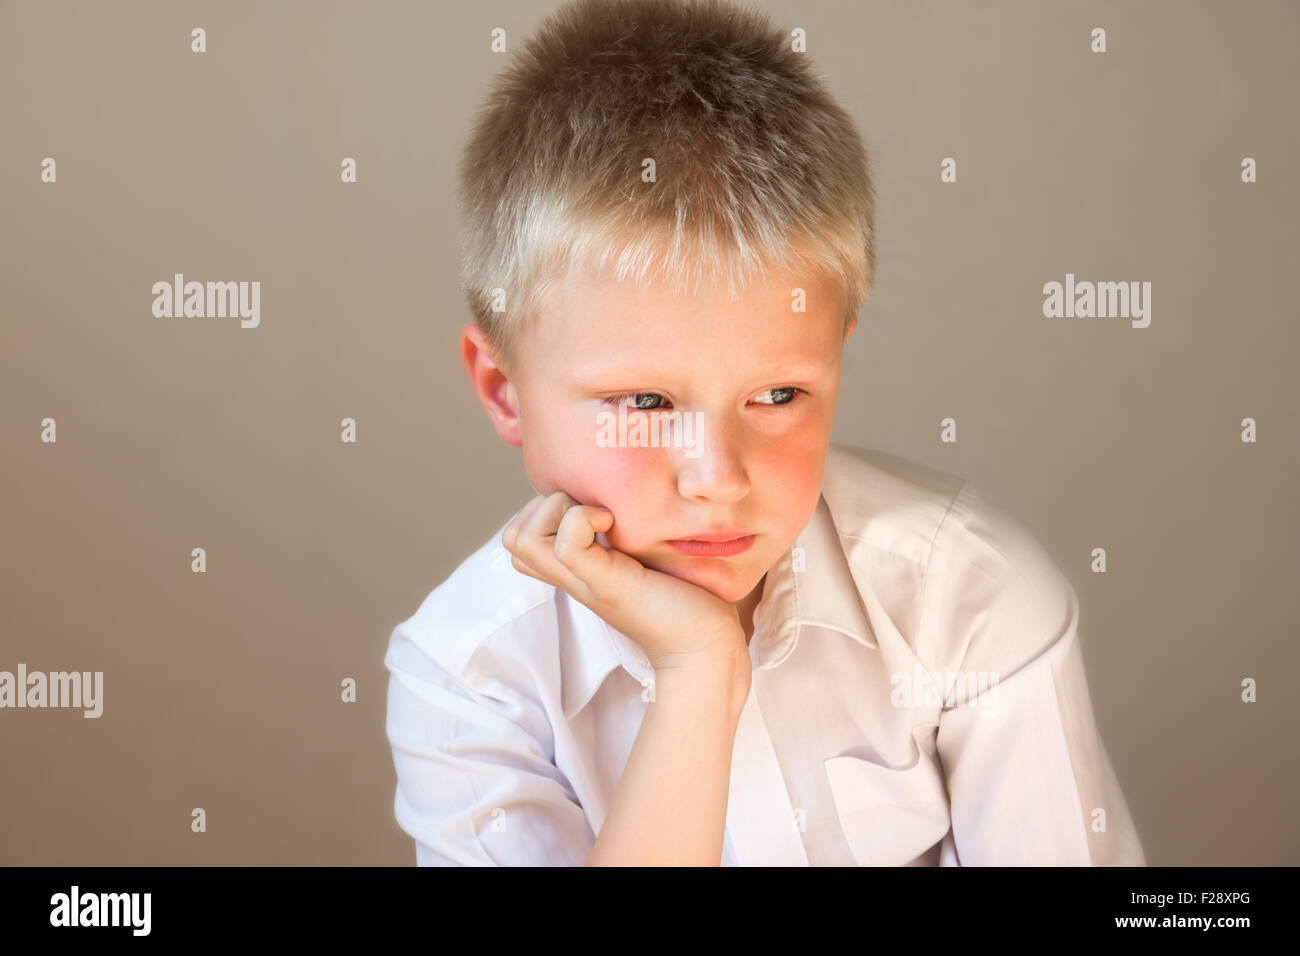 Sad upset tired worried unhappy school child (boy) close up horizontal  portrait with copy space Stock Photo